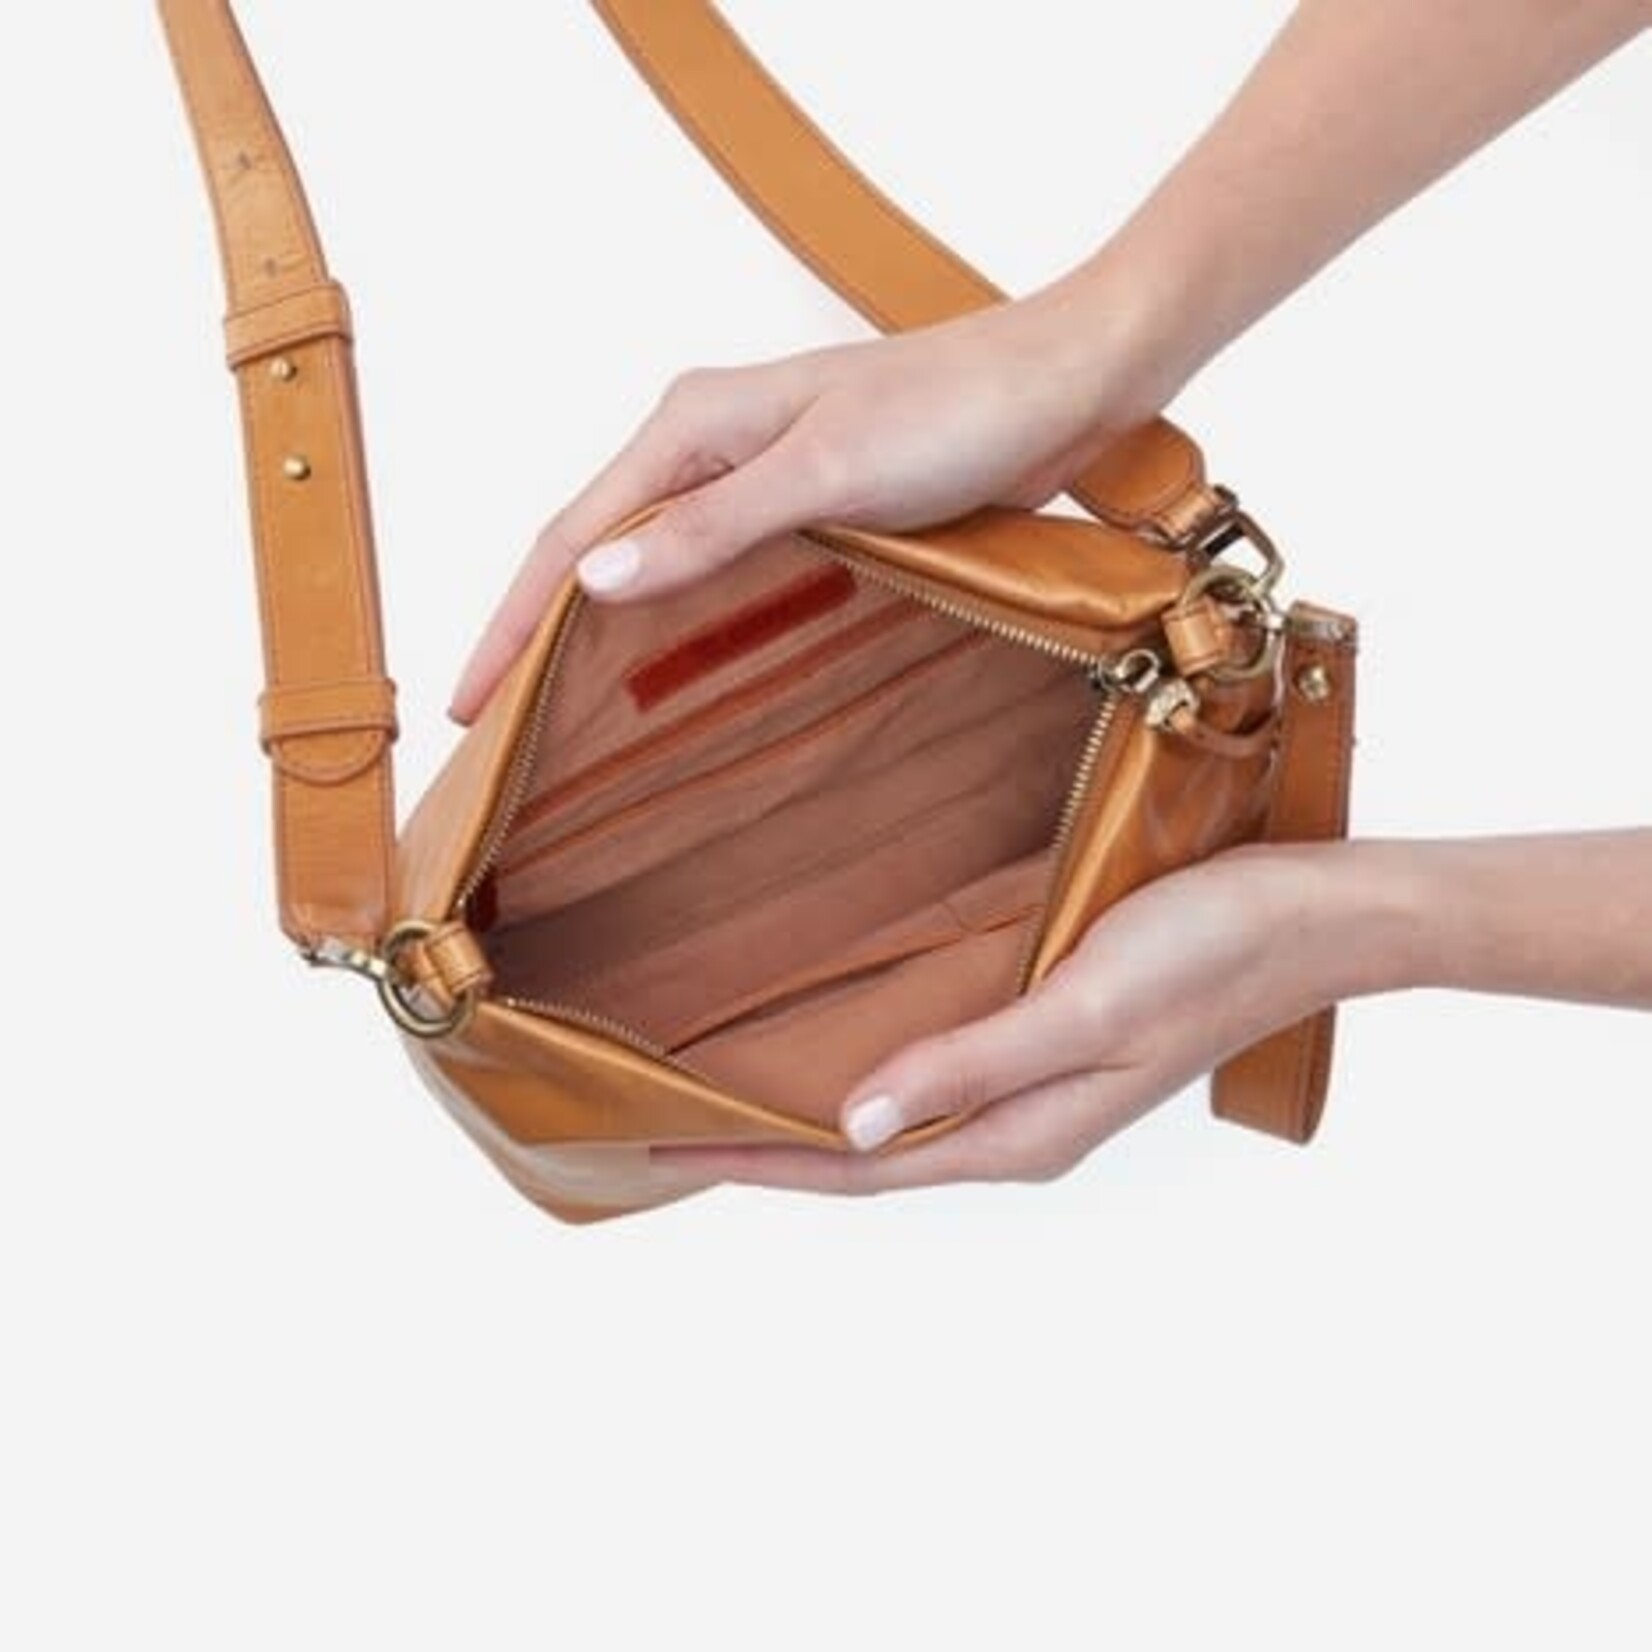 HOBO Ashe Polished Leather Crossbody in Natural